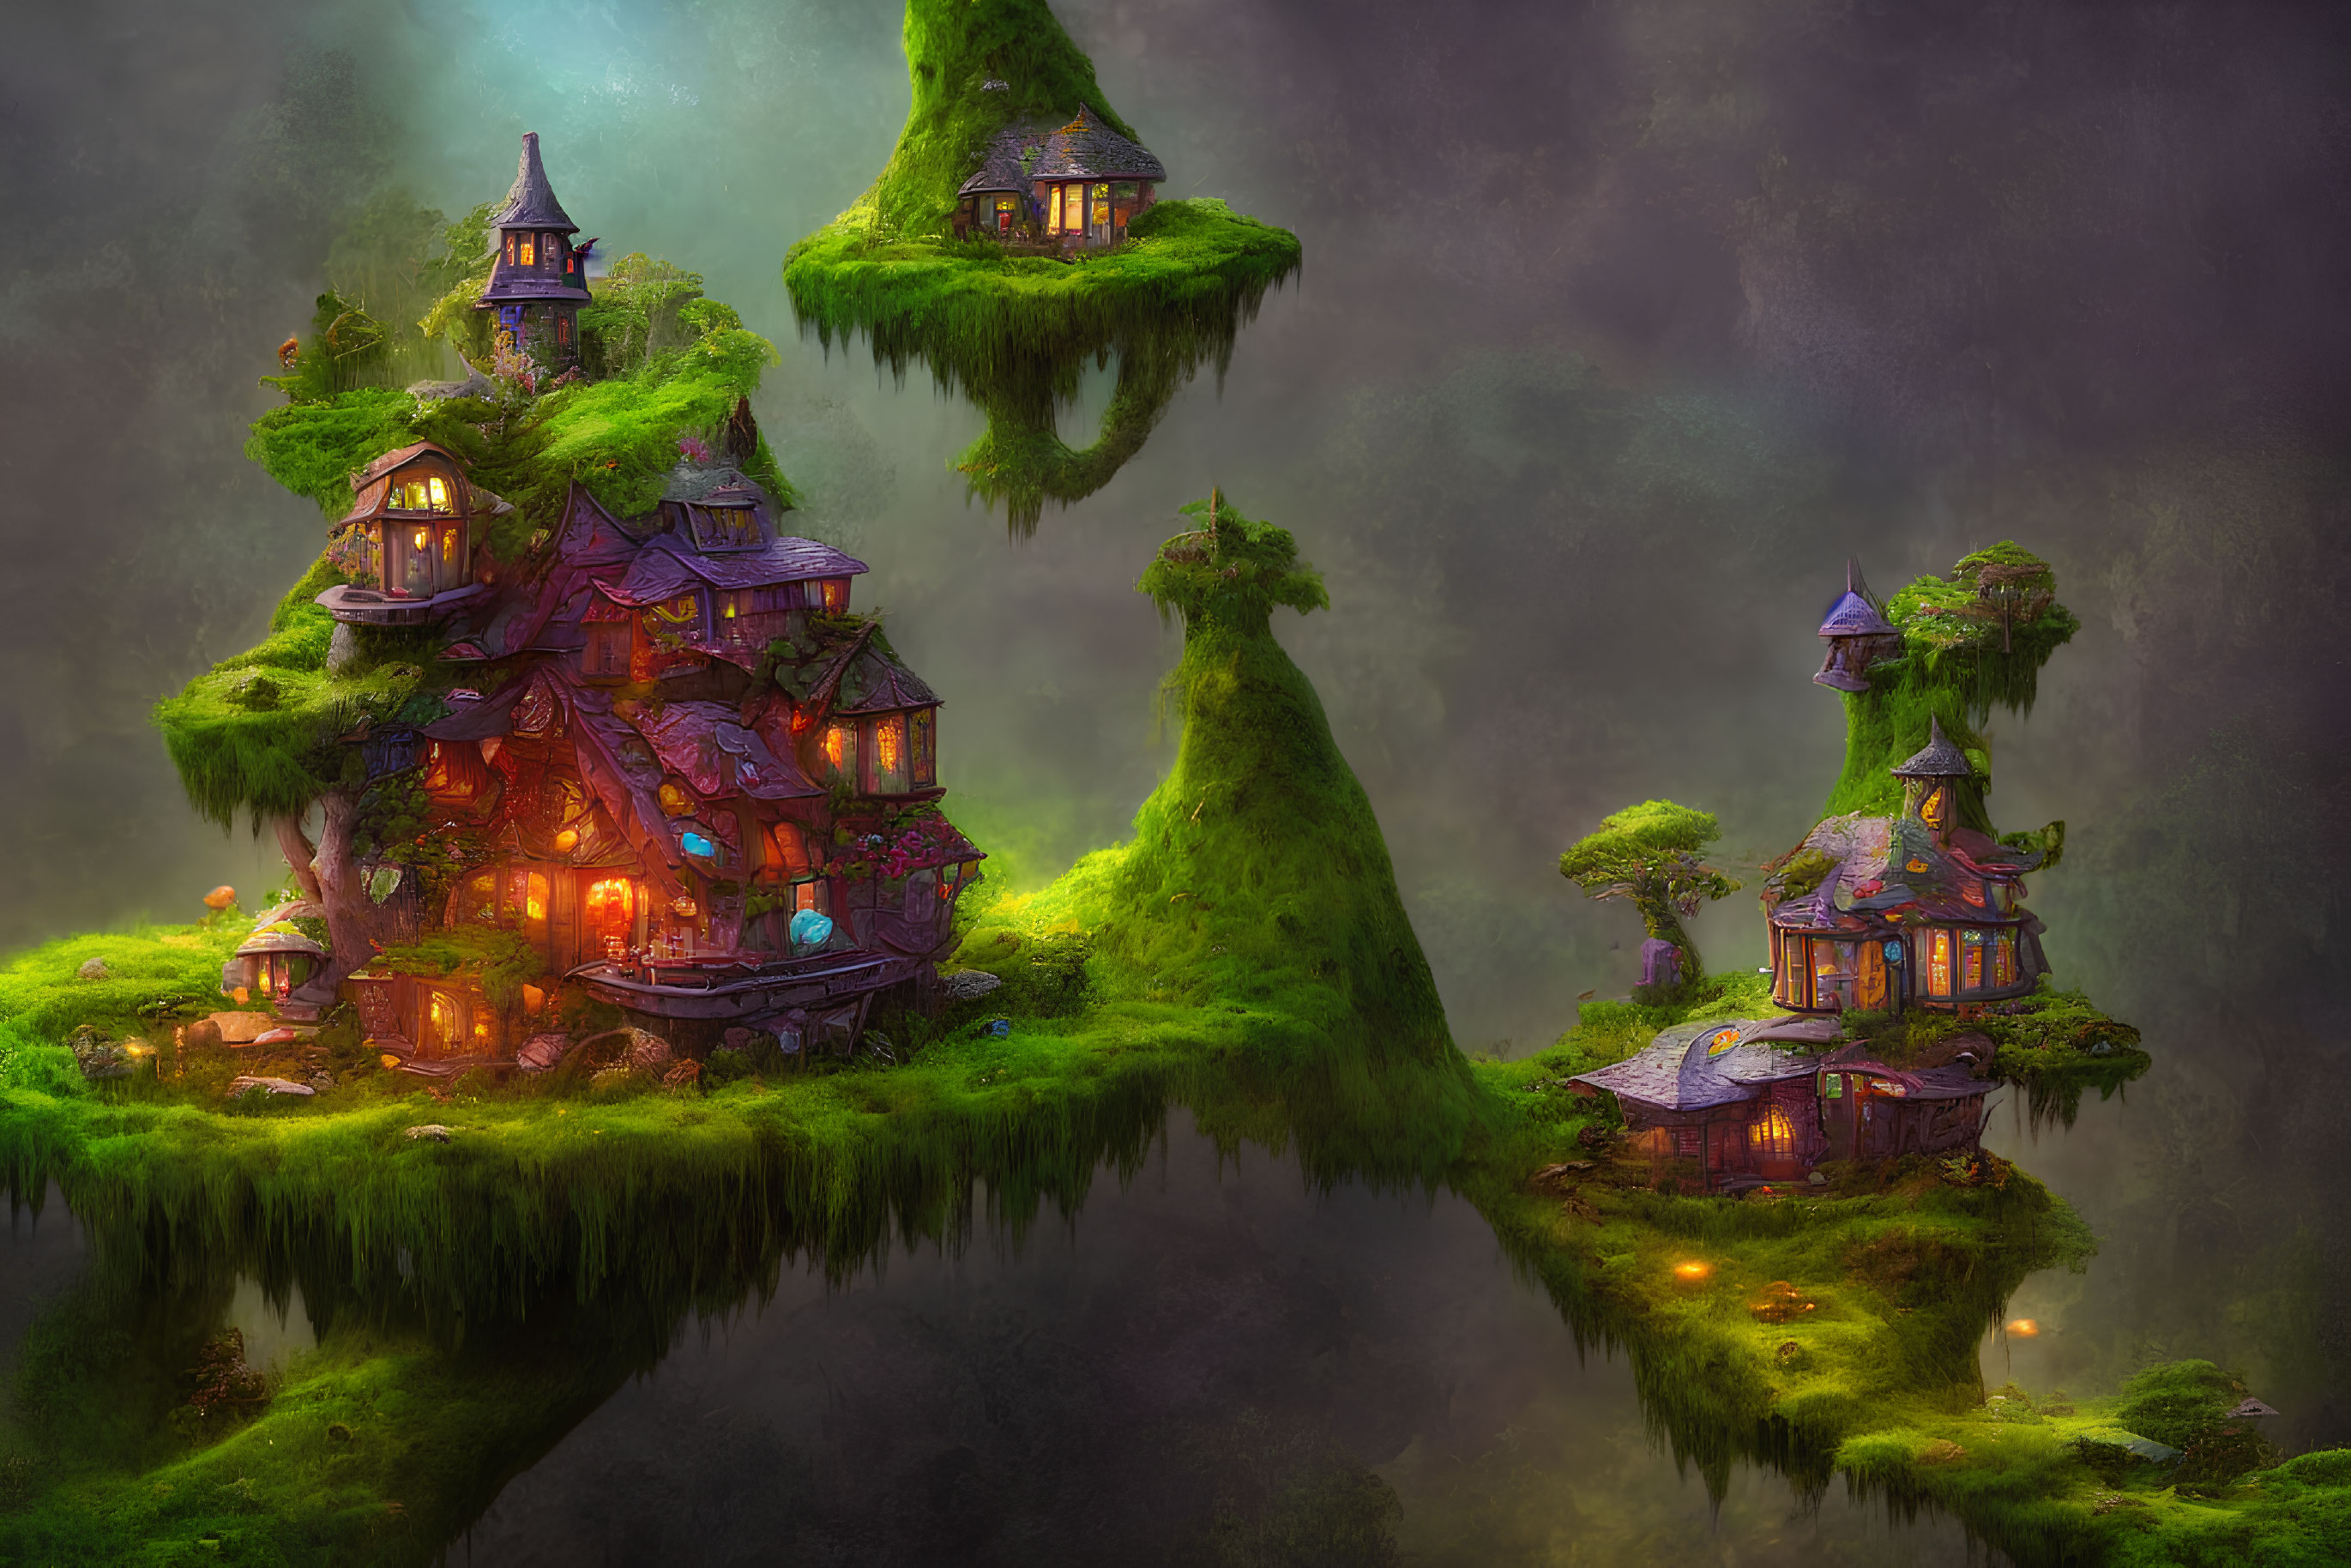 Whimsical houses on lush, glowing floating islands